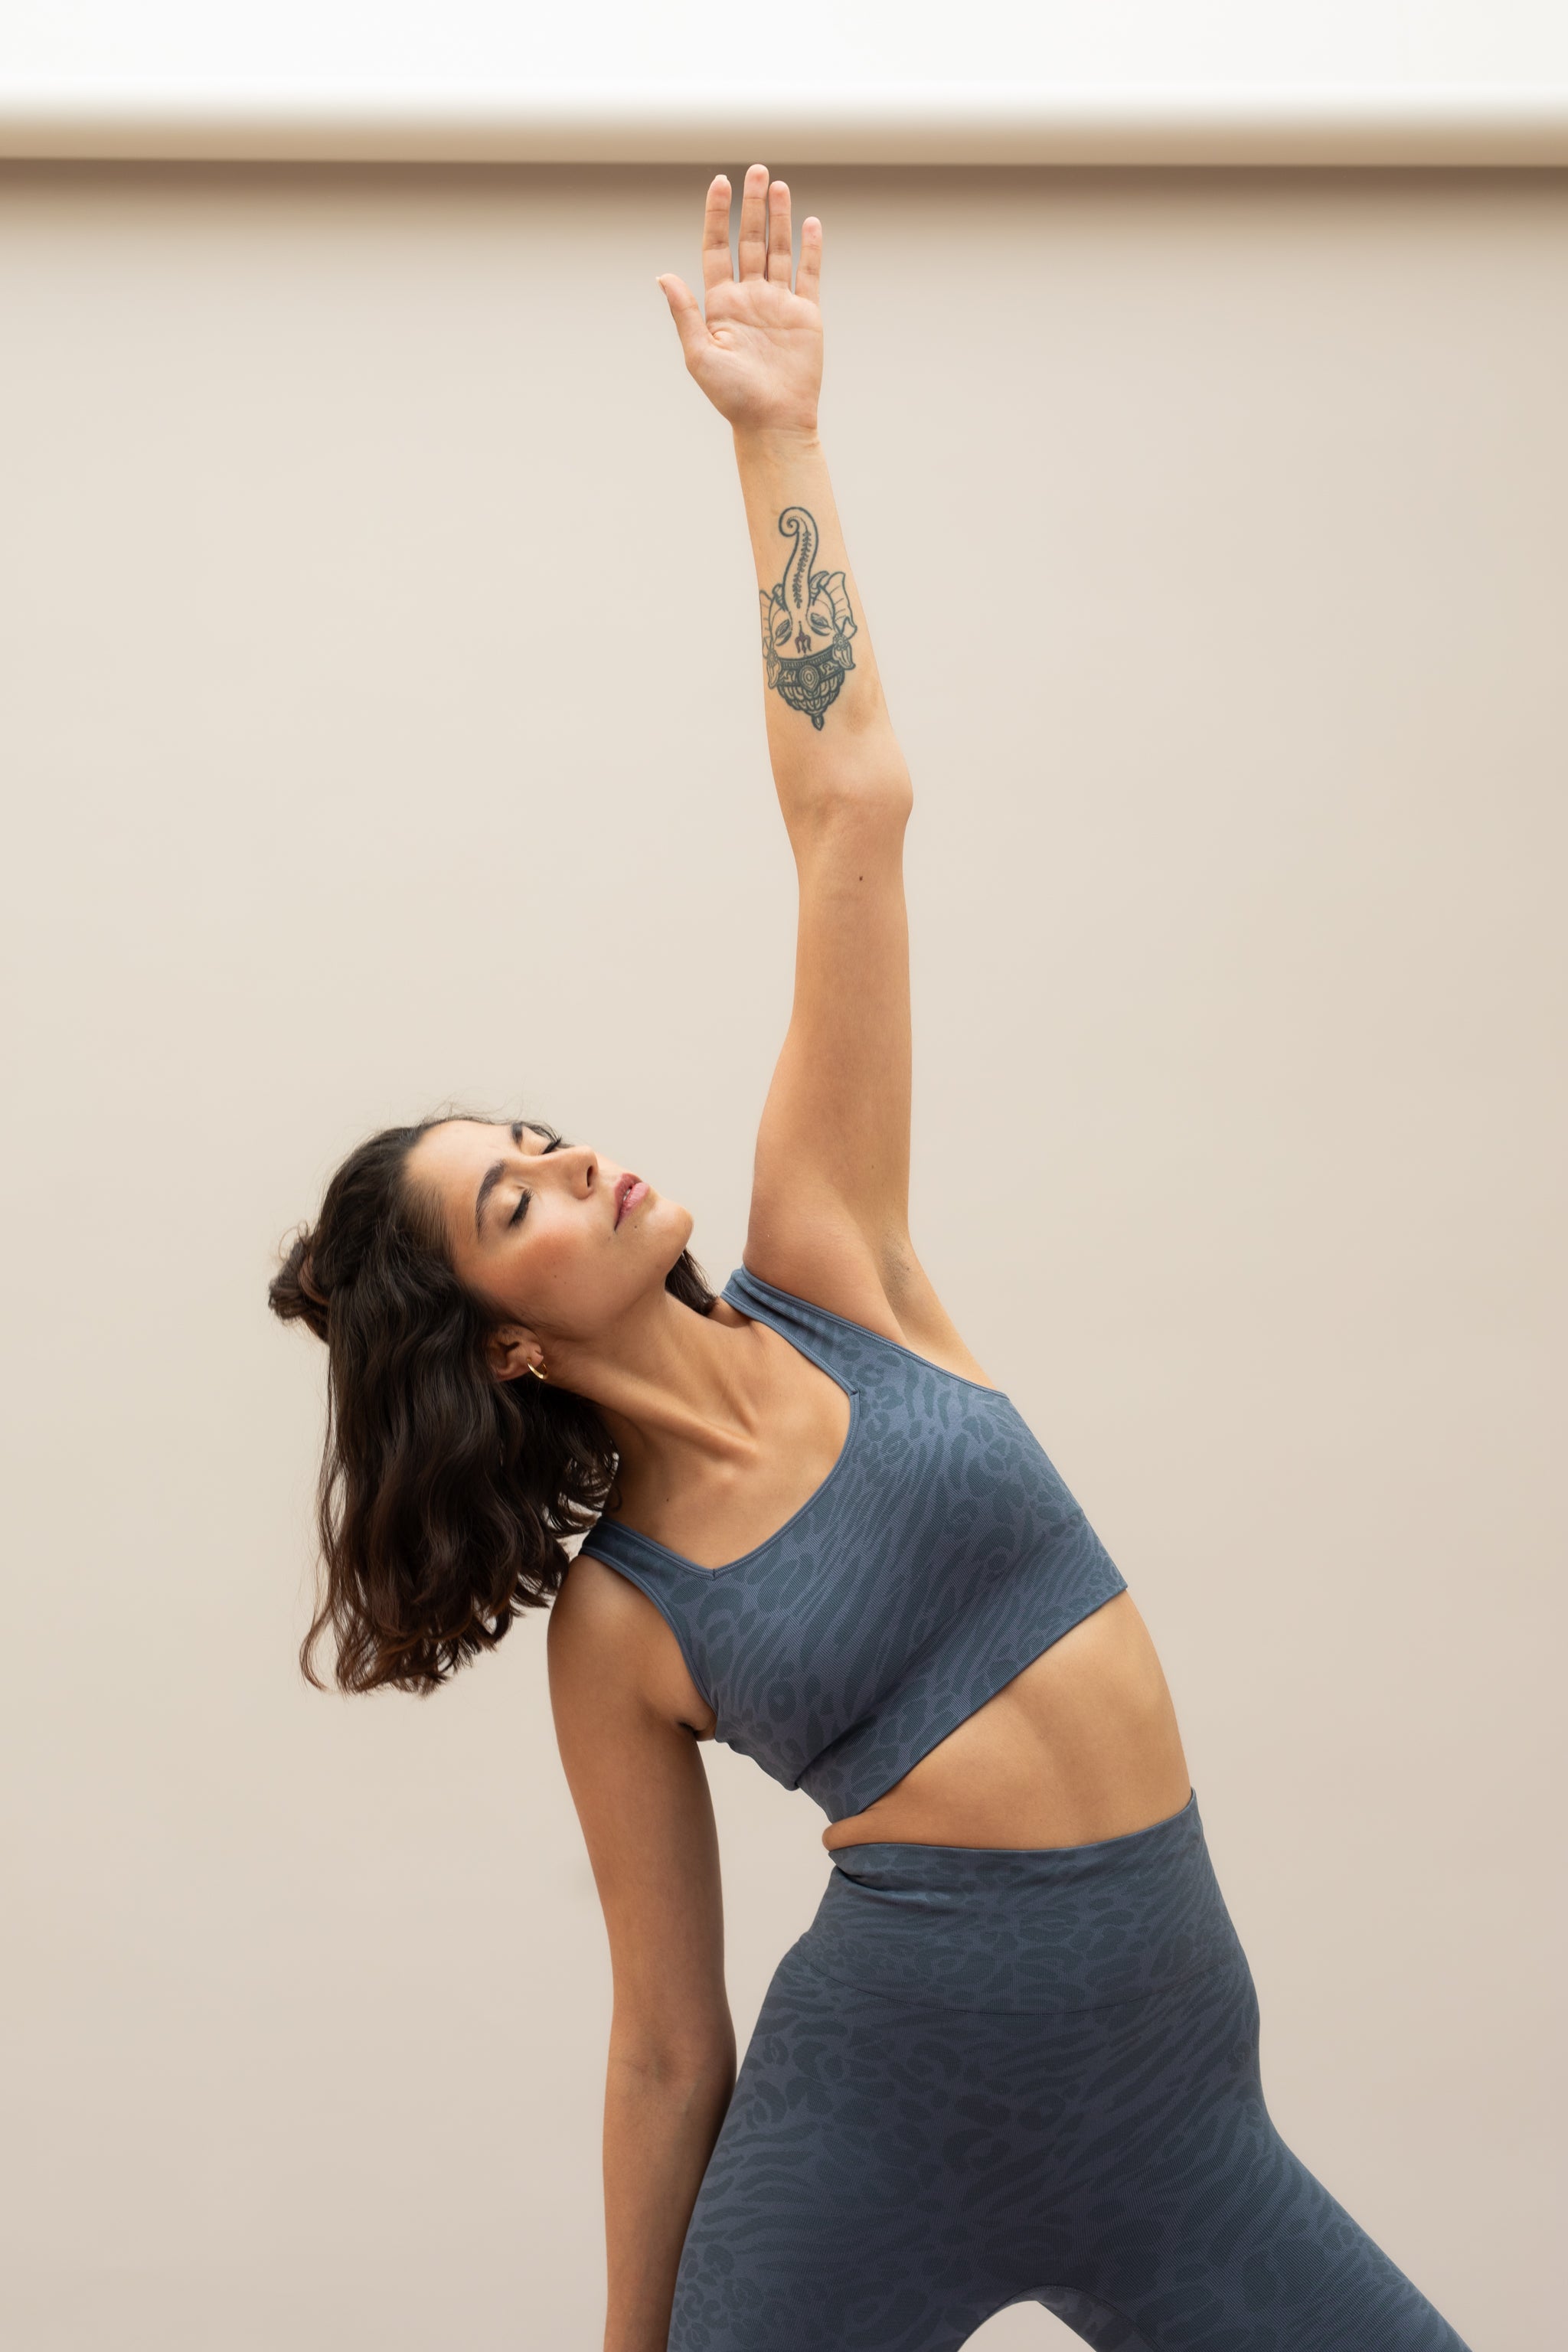 Blue leggings and blue recycled sports bra for sustainable activewear brand, Jilla.